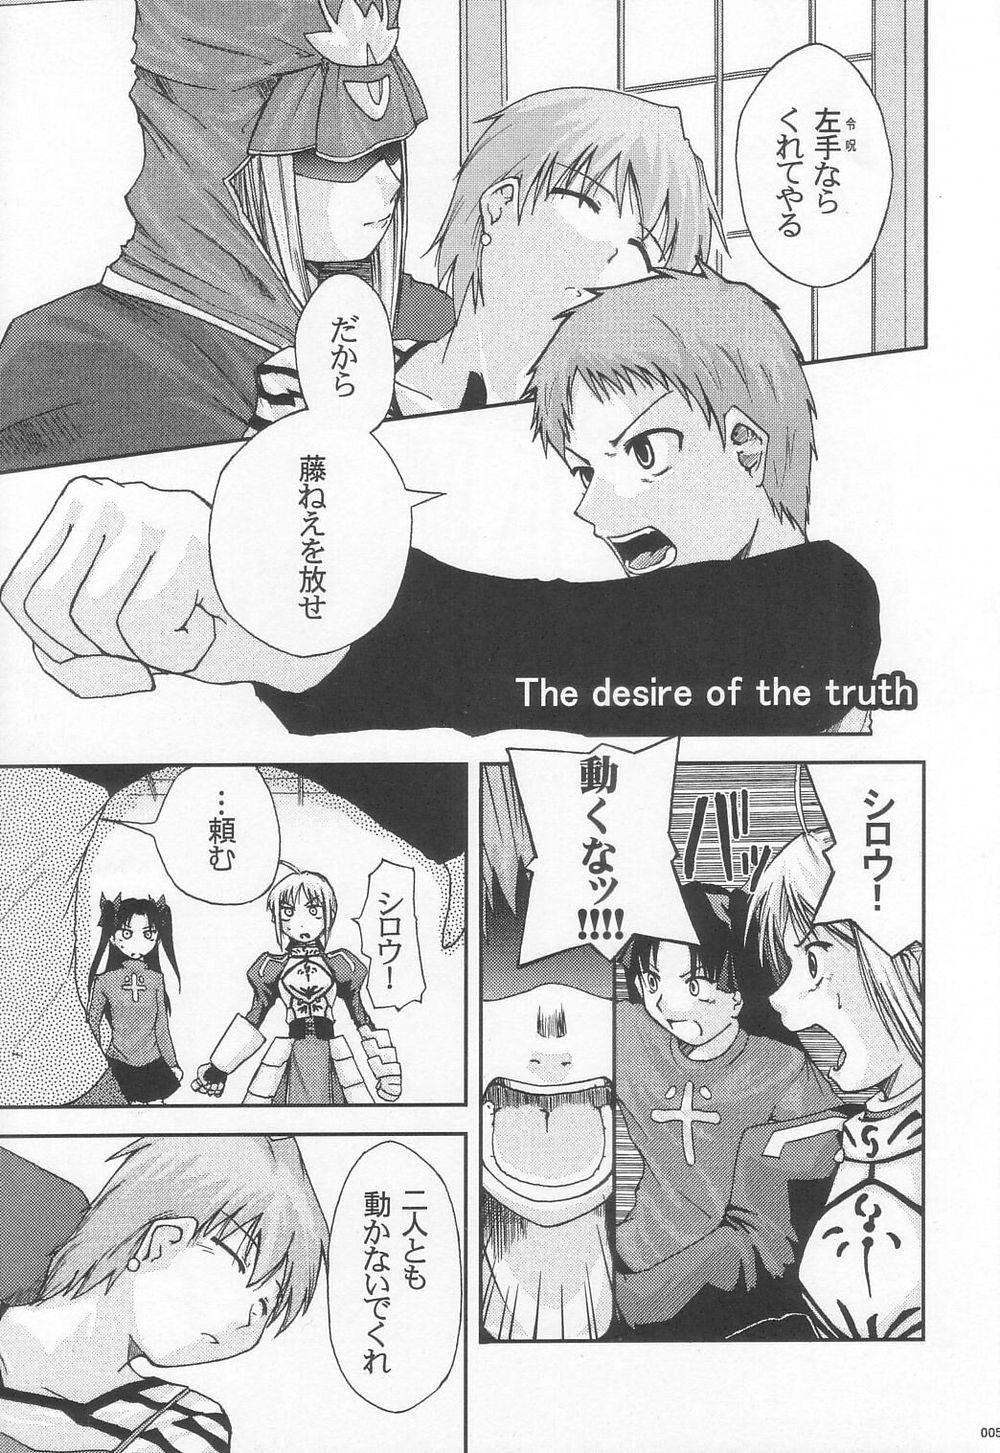 Assfucking The desire of the truth - Fate stay night Bigblackcock - Page 4